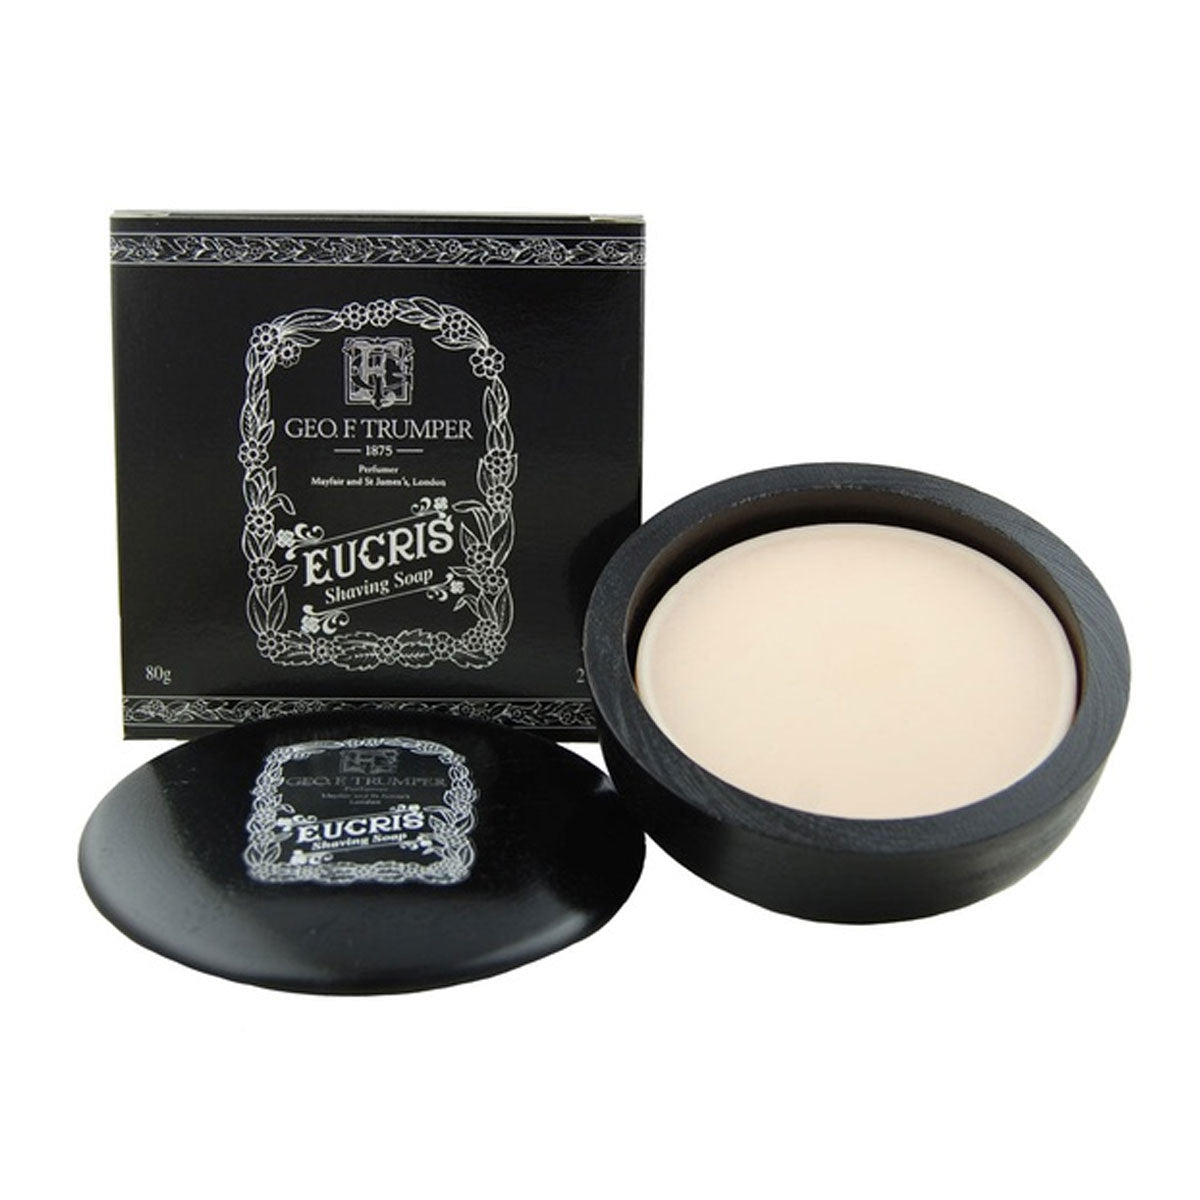 Primary image of Eucris Shaving Soap + Bowl